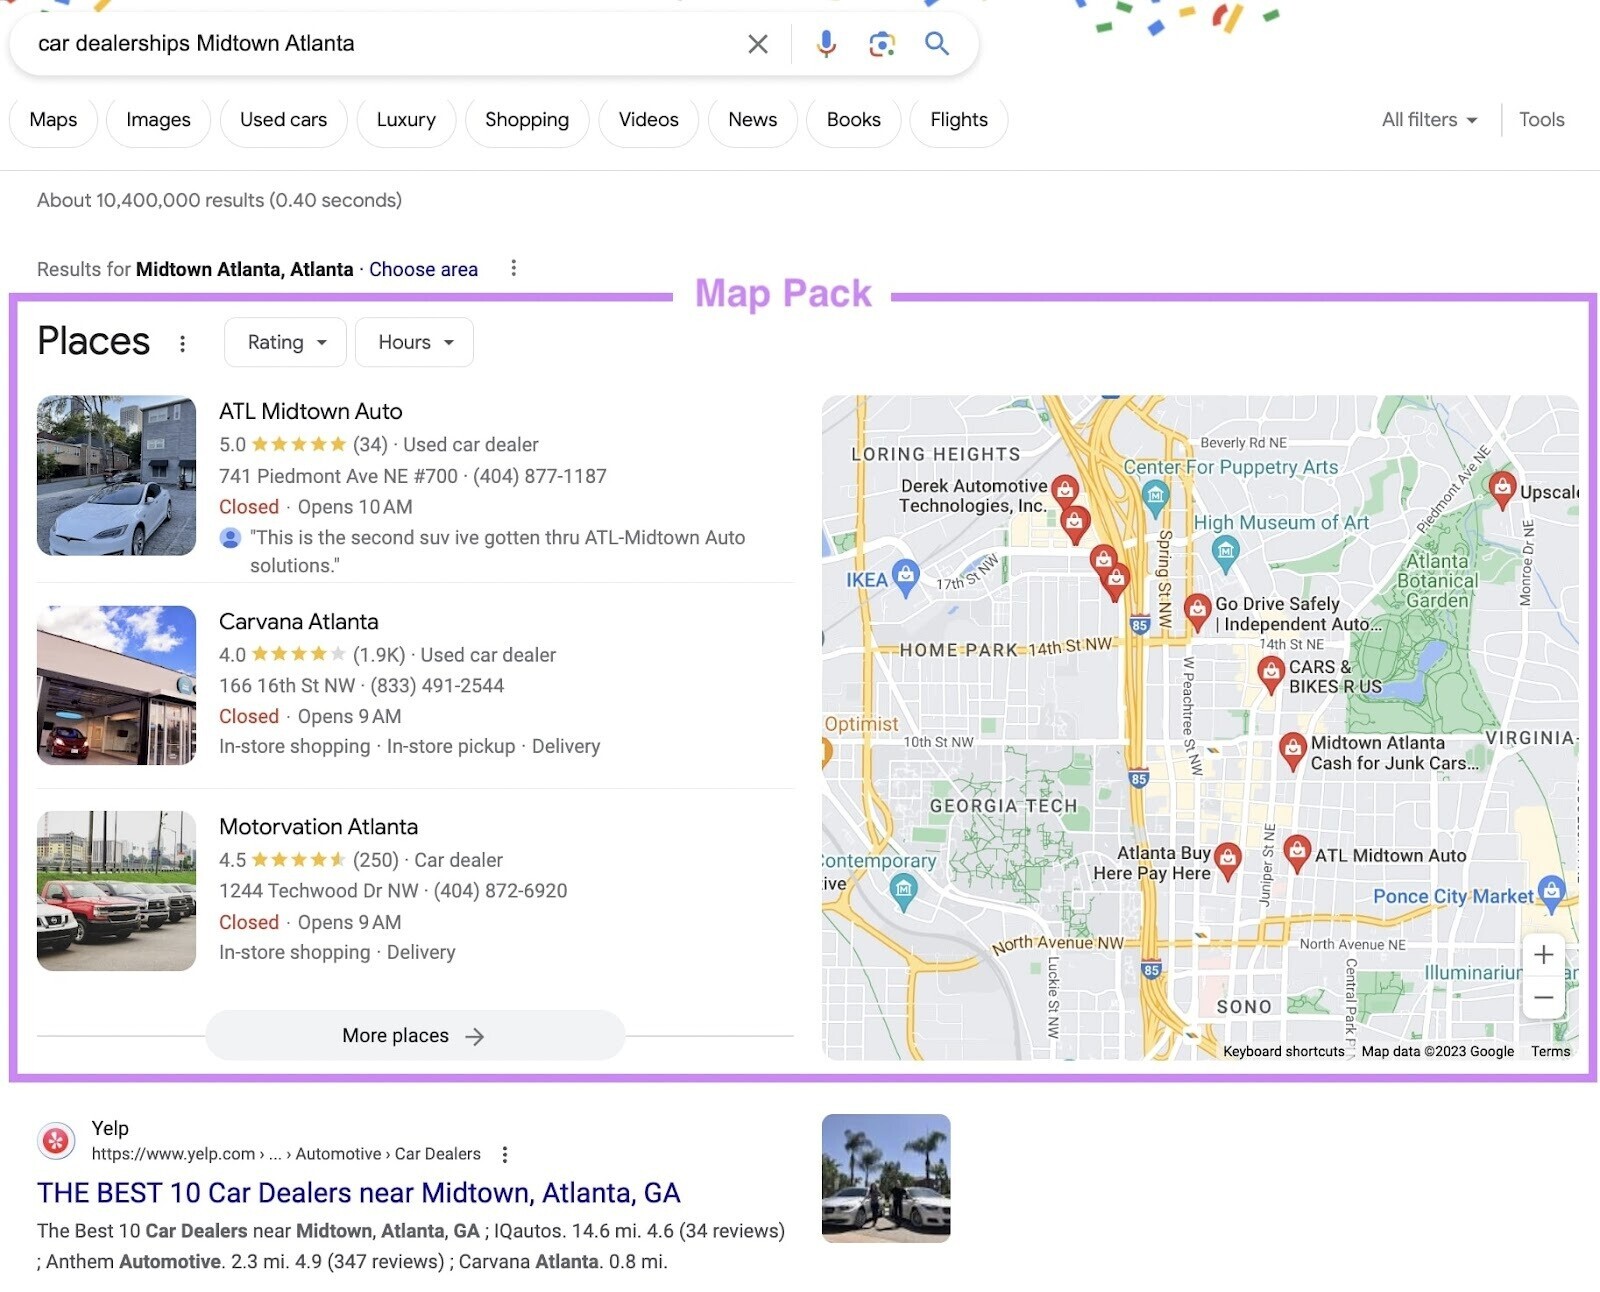 “Map Pack” on Google SERP for "car dealerships Midtown Atlanta" query